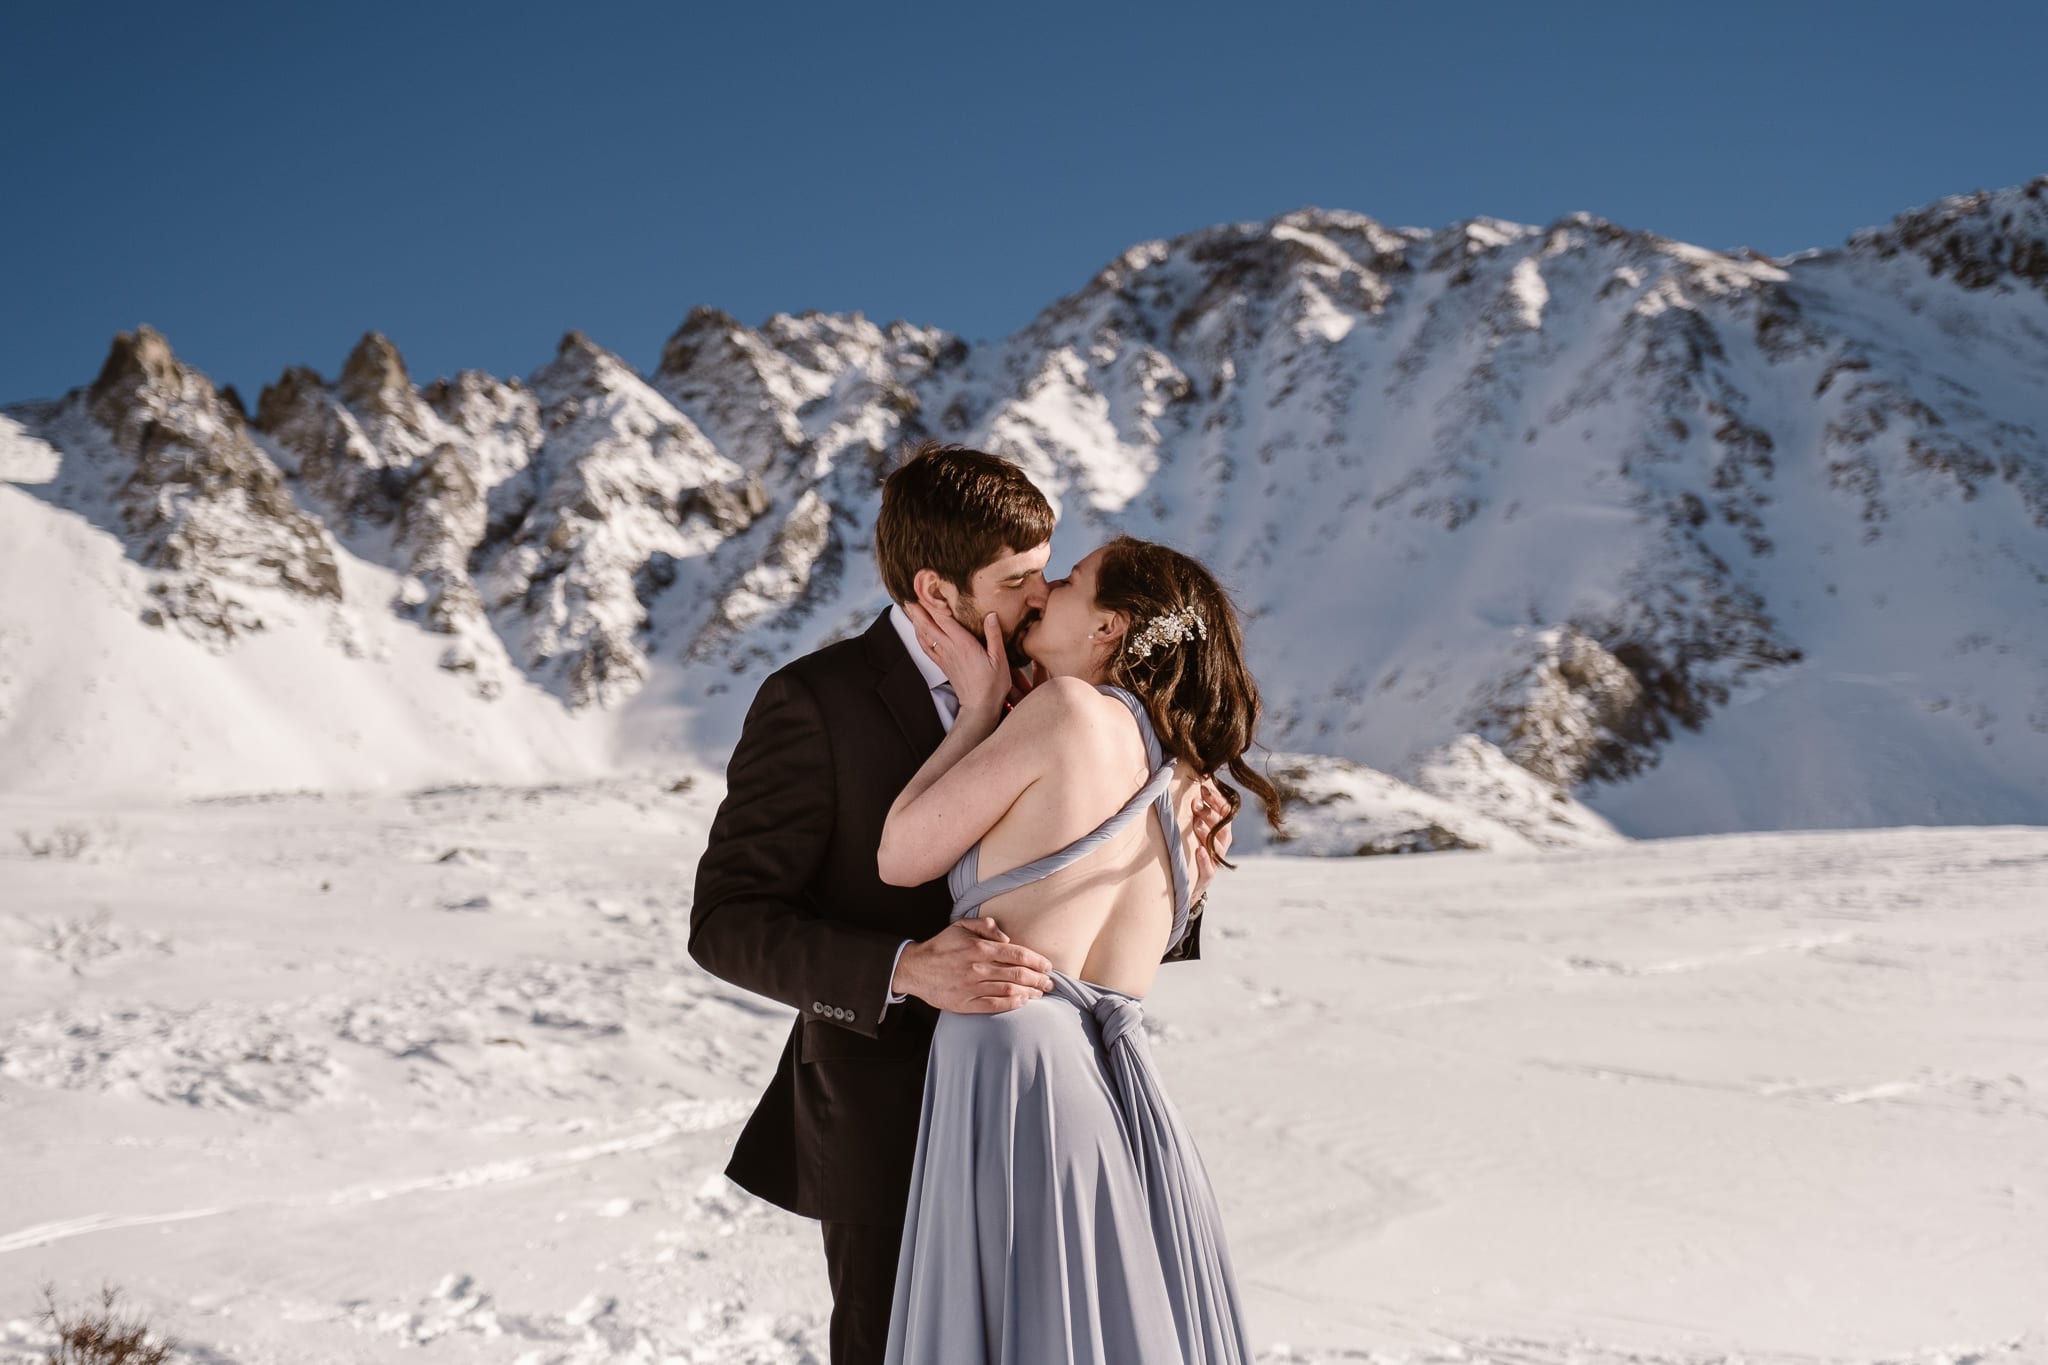 Backcountry skiing elopement in the snow-covered mountains of Colorado, bride wearing light blue wedding dress with open back